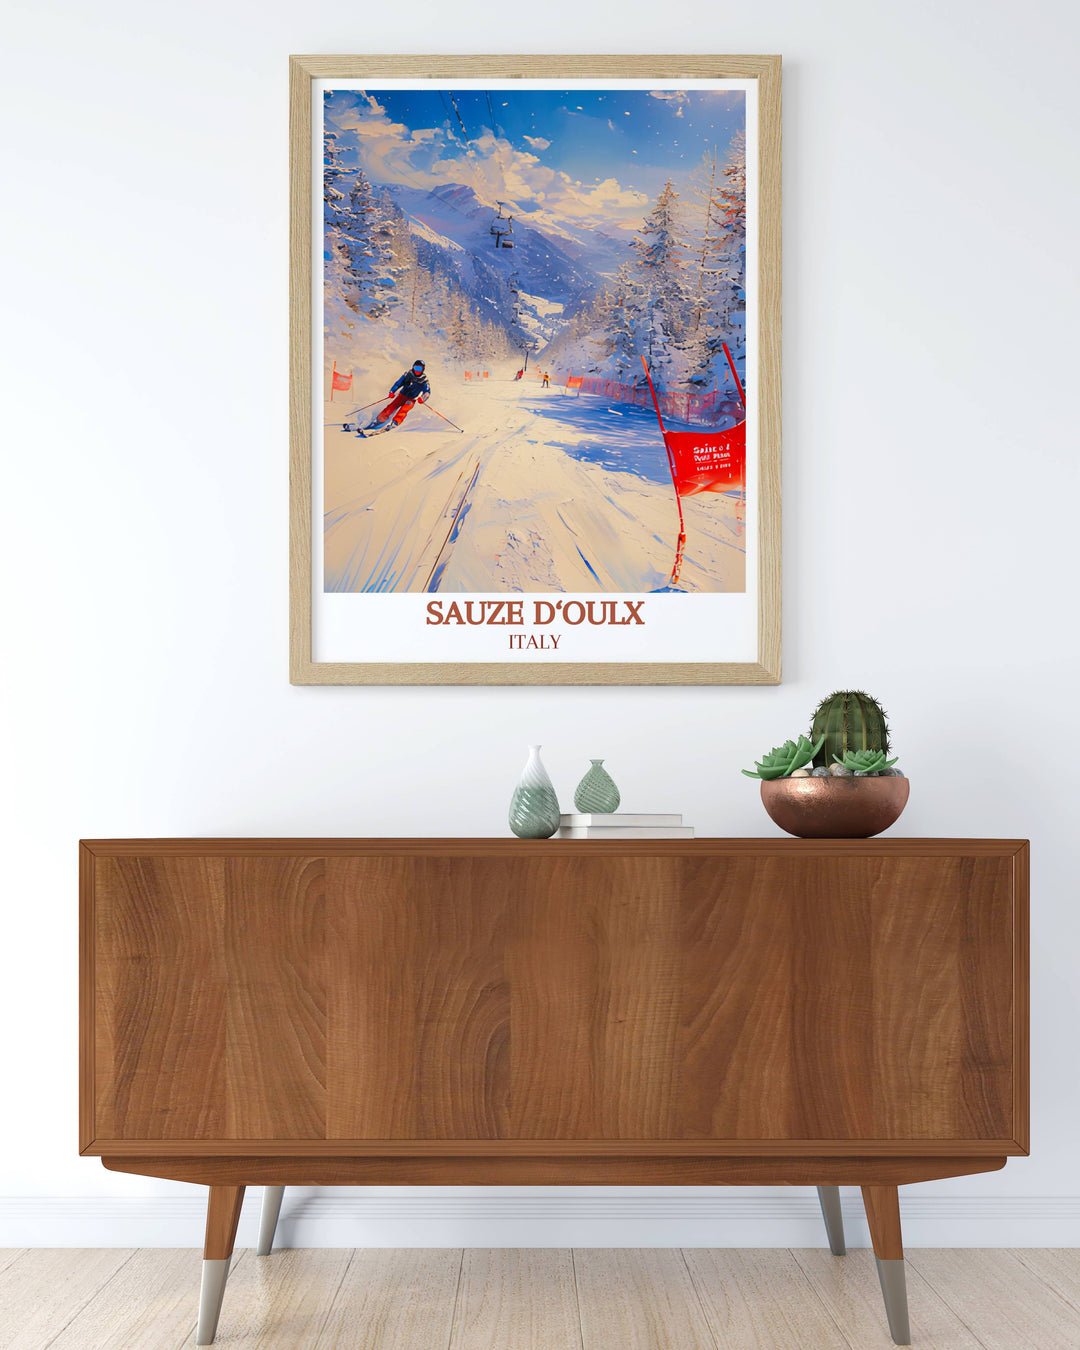 Uncover the adventure of Sauze dOulx with our Ski Resort Travel Posters, capturing the essence of this premier ski destination in beautiful detail.